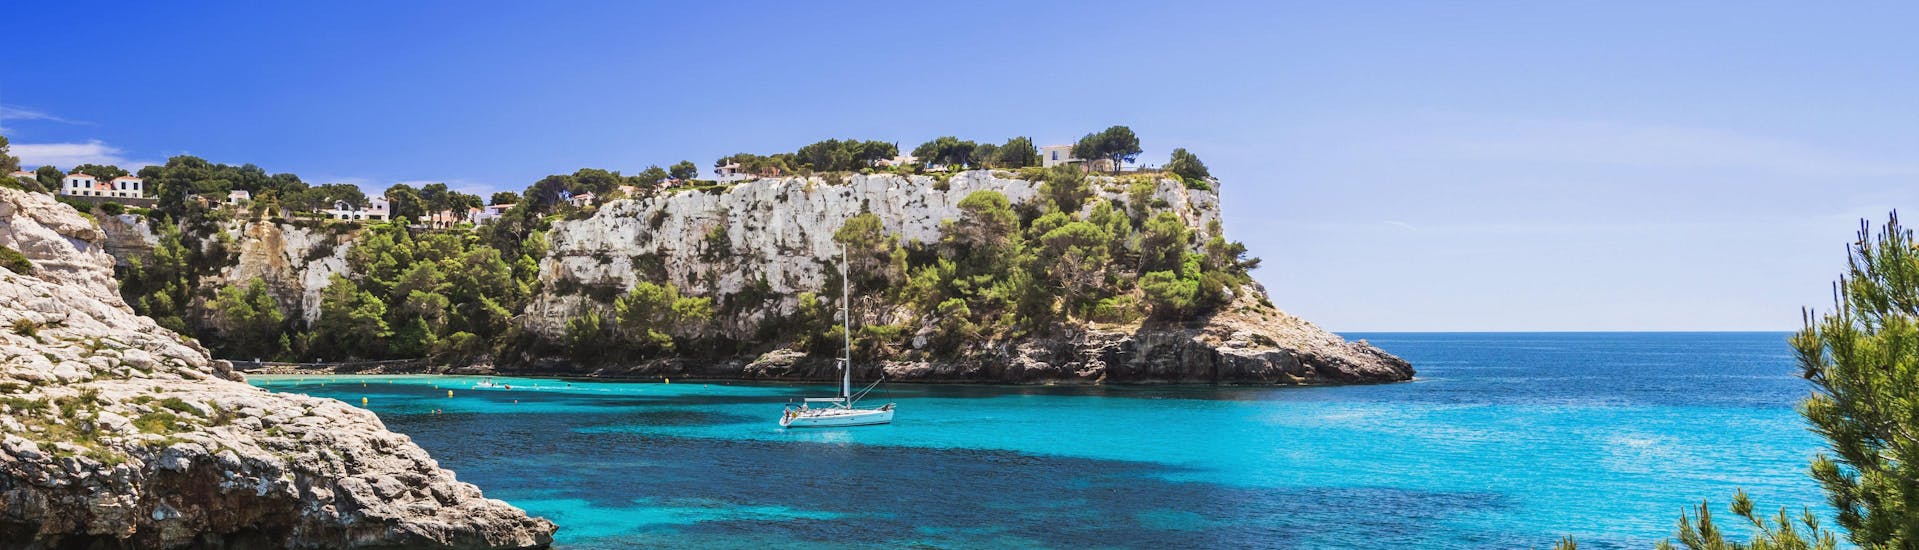 View of the crystal clear water of the Mediterranean Sea in Menorca during a boat trip.